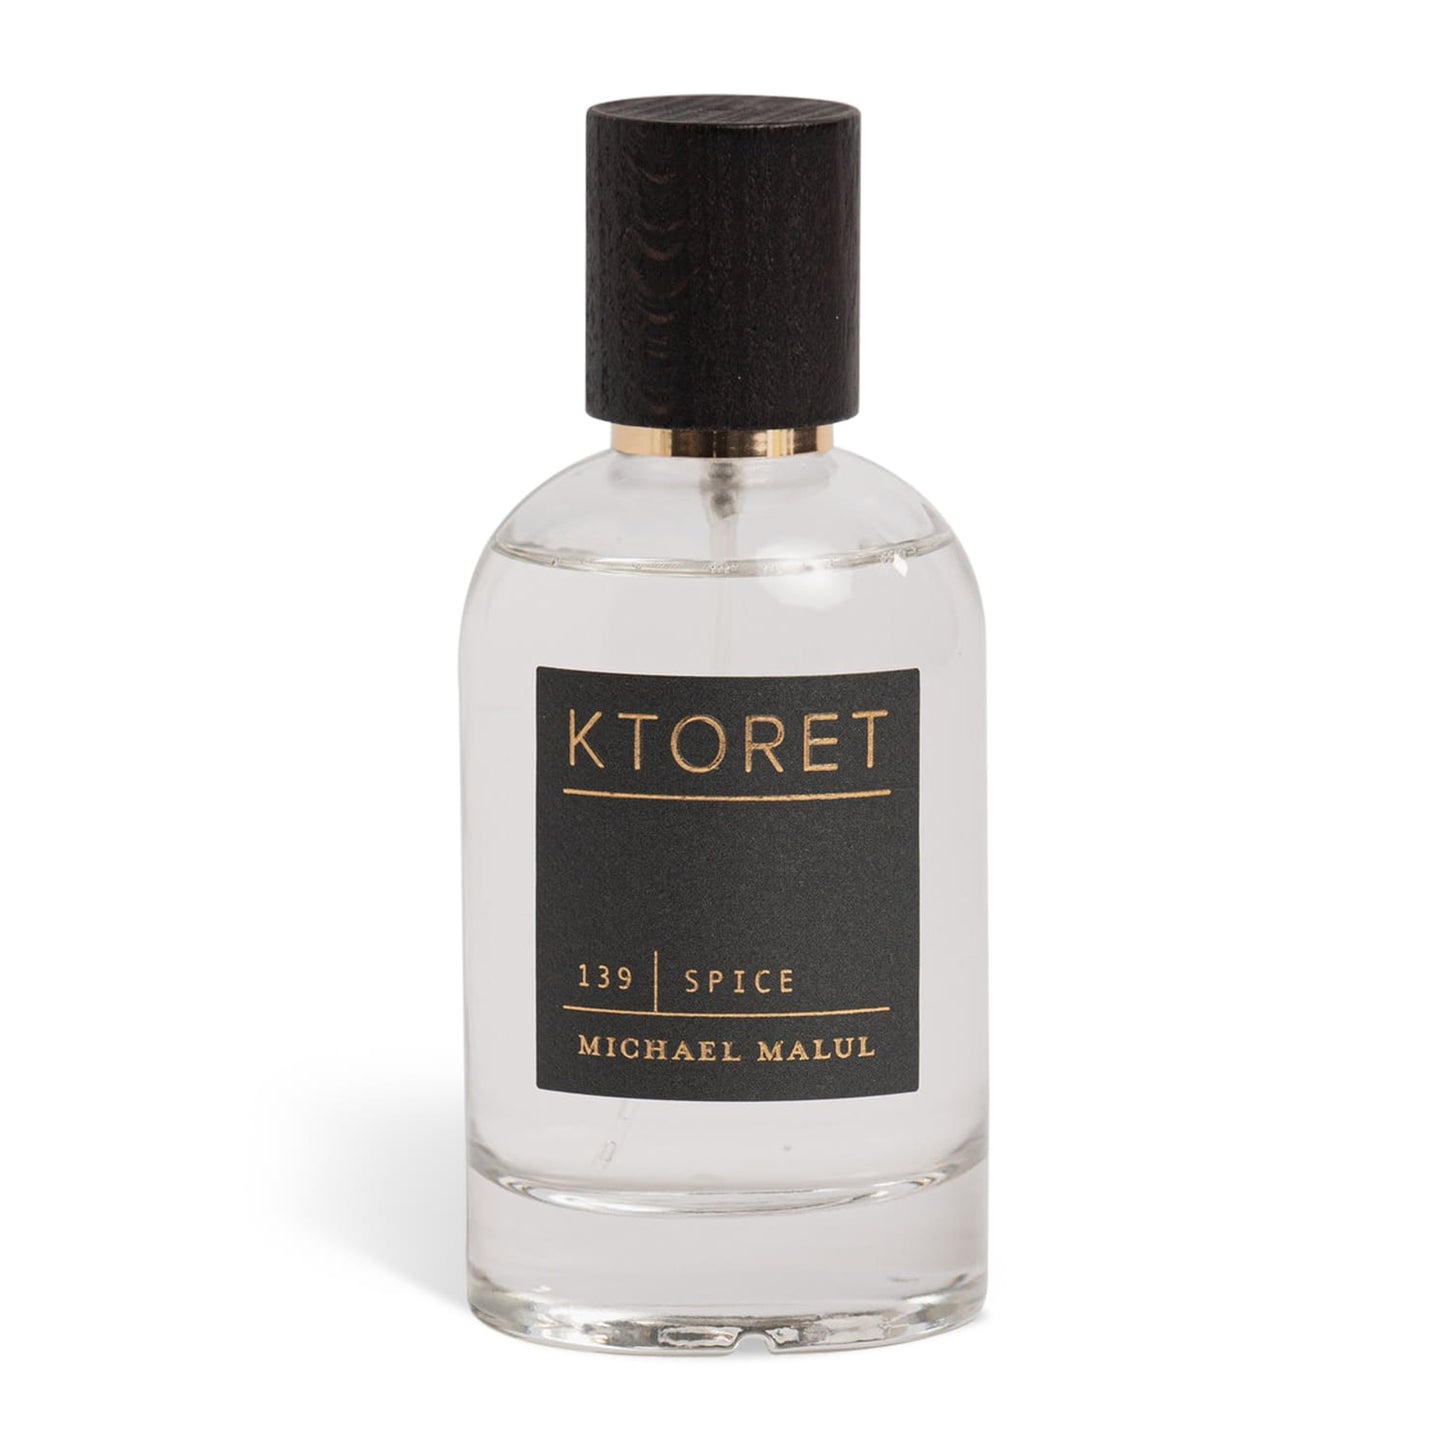 KTORET 139 Spice By Michael Malul - Scent In The City - Perfume & Cologne